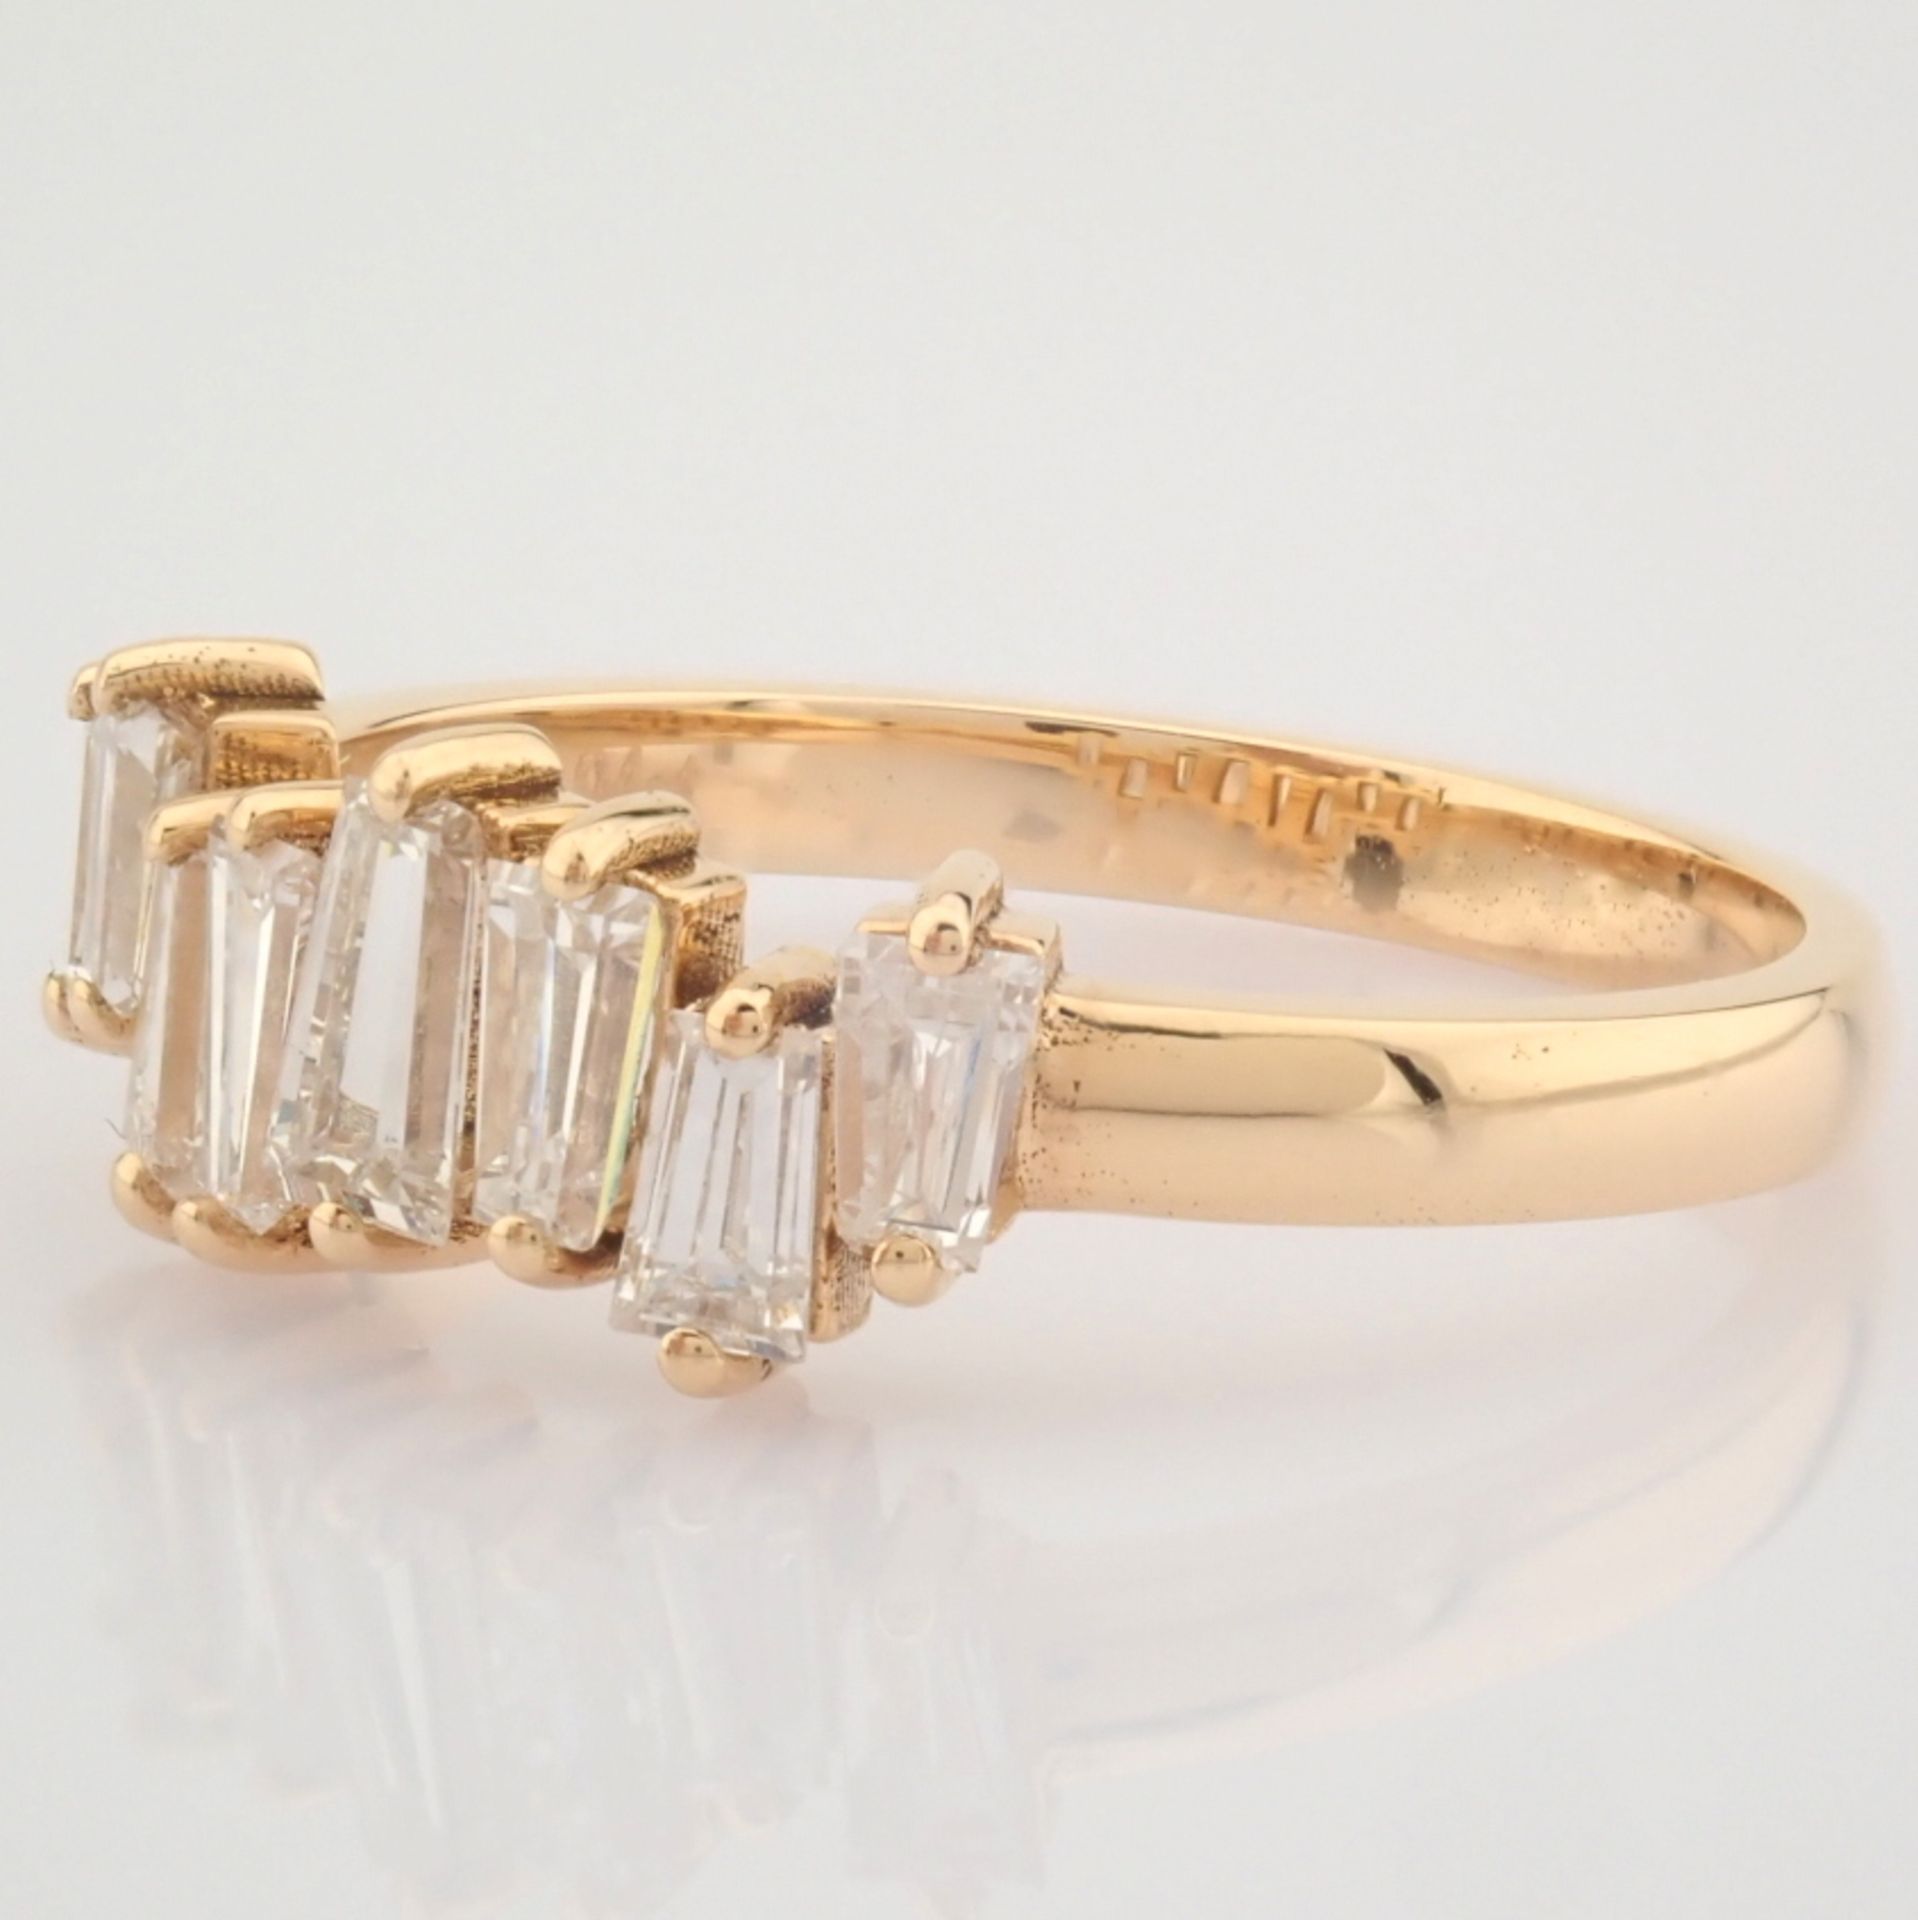 Certificated 18K Rose/Pink Gold Trapeze Cut Diamond Ring (Total 0.94 ct Stone) - Image 2 of 7